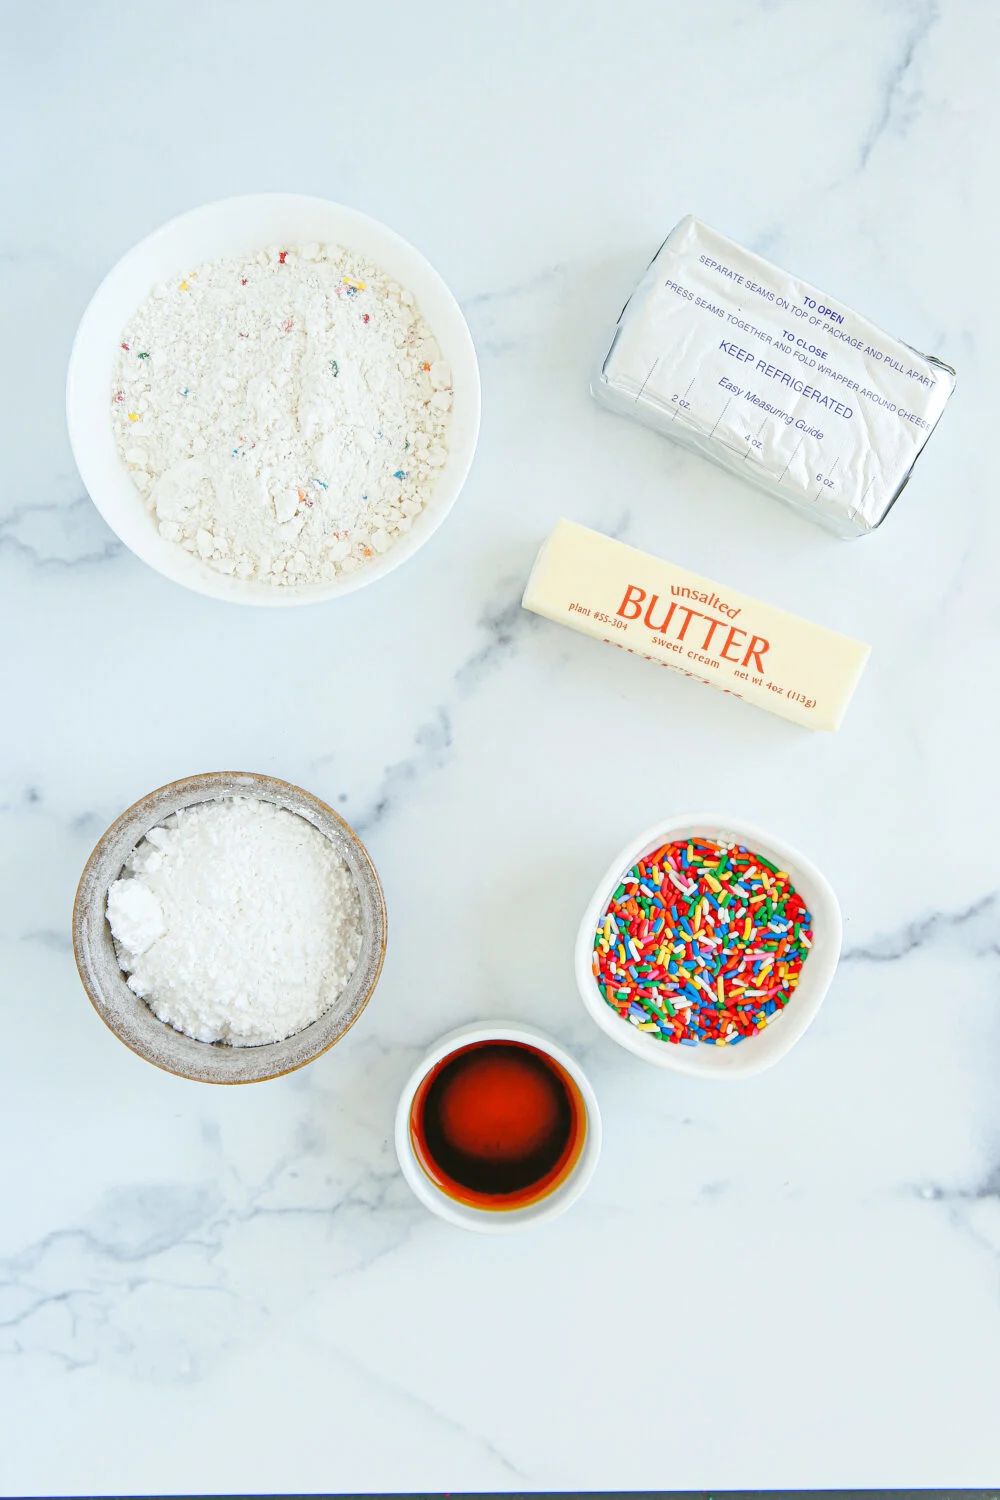 Cream cheese, butter, sprinkles, and other ingredients in bowls. 